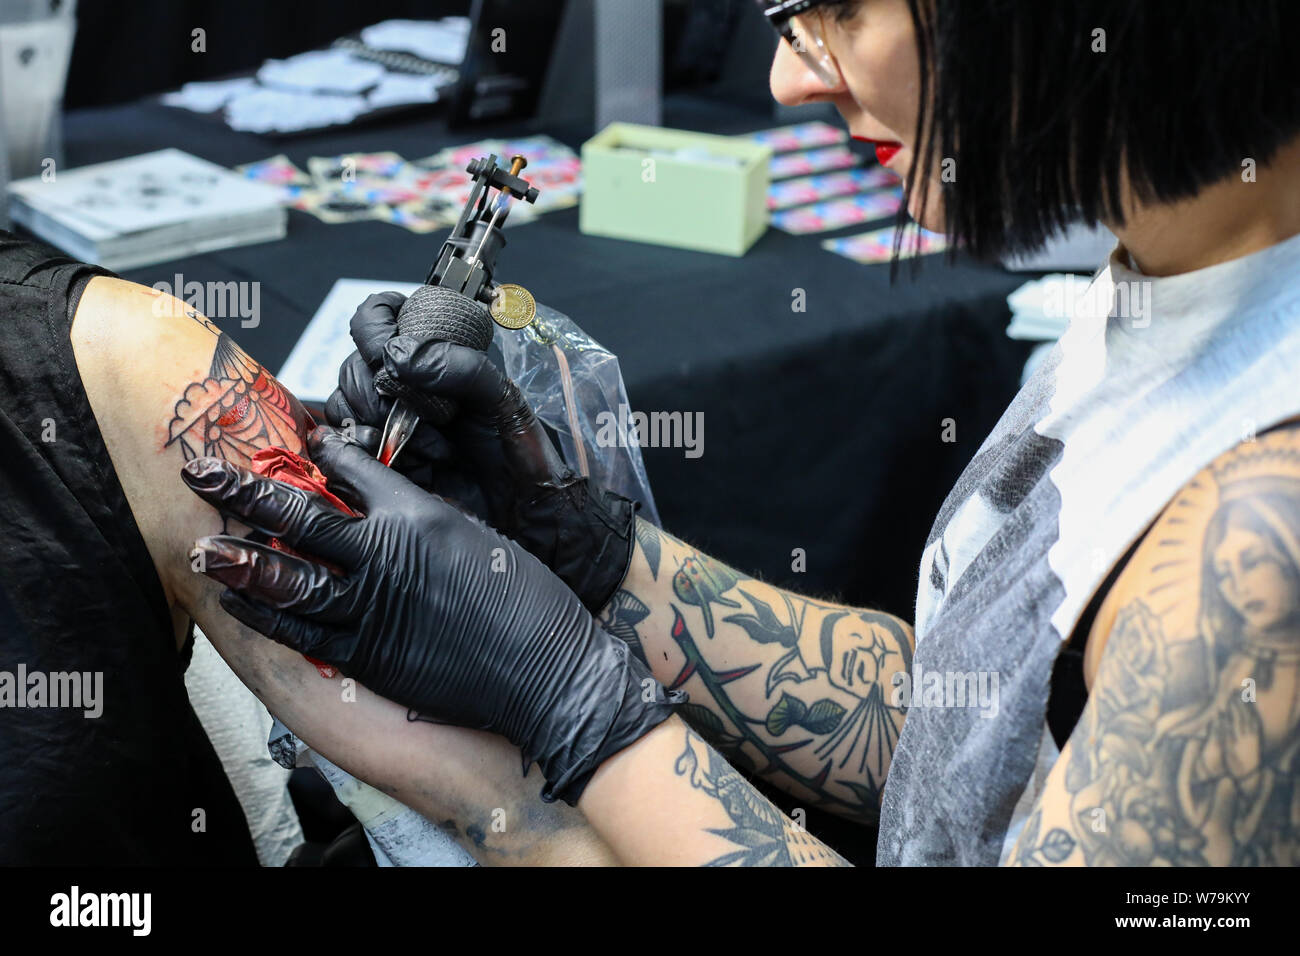 Tattoo in the making at Helsinki Ink Tattoo Convention in Helsinki, Finland Stock Photo